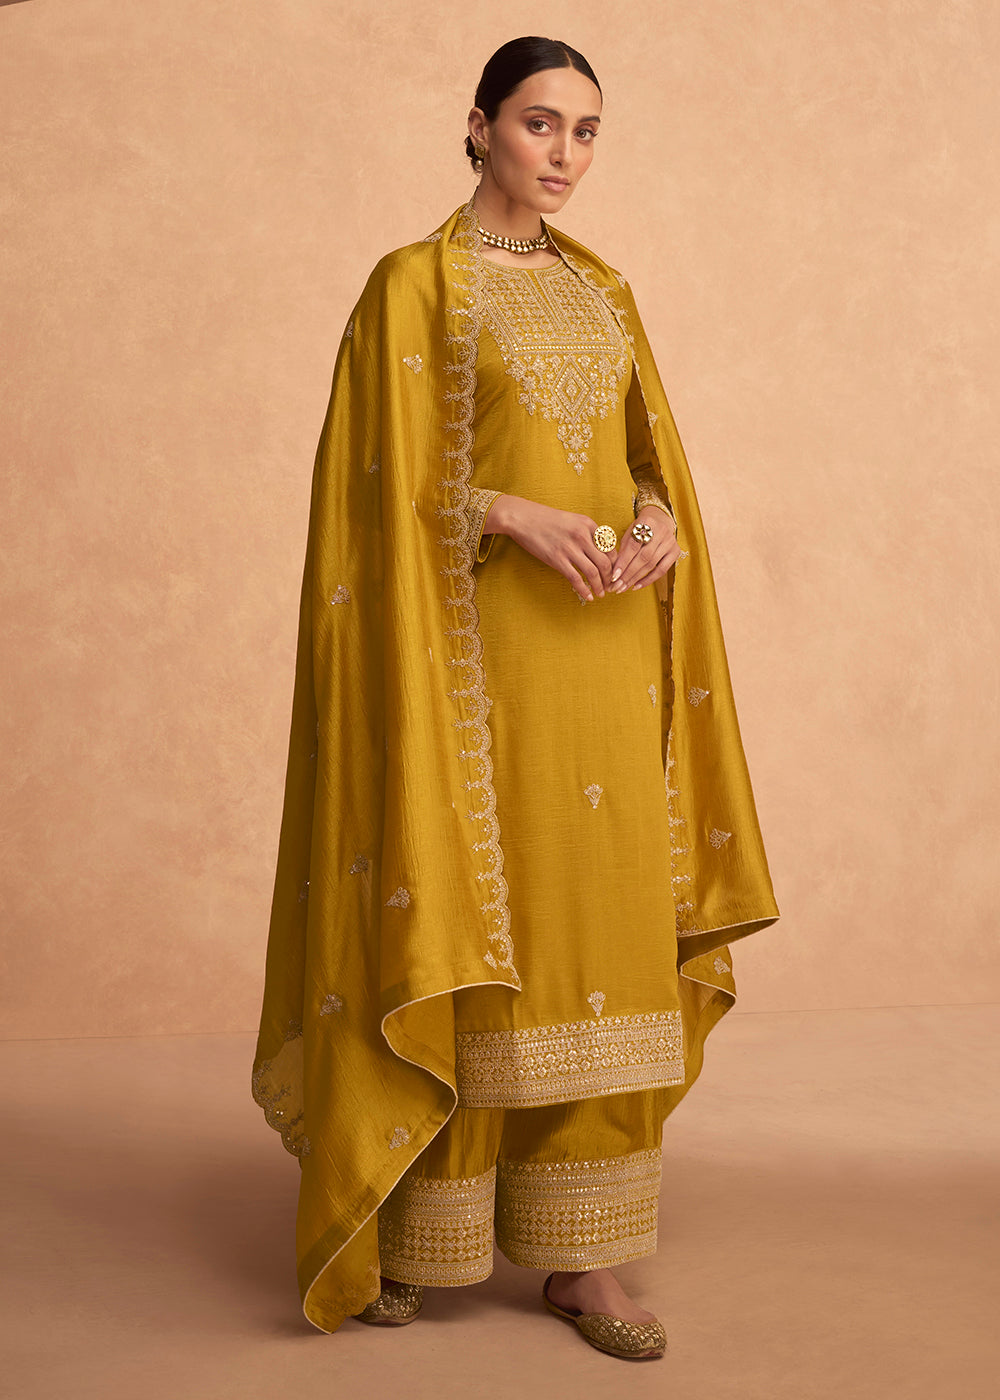 Buy Now Pretty Yellow Premium Silk Embroidered Indian Palazzo Salwar Suit Online in USA, UK, Canada, Germany & Worldwide at Empress Clothing.